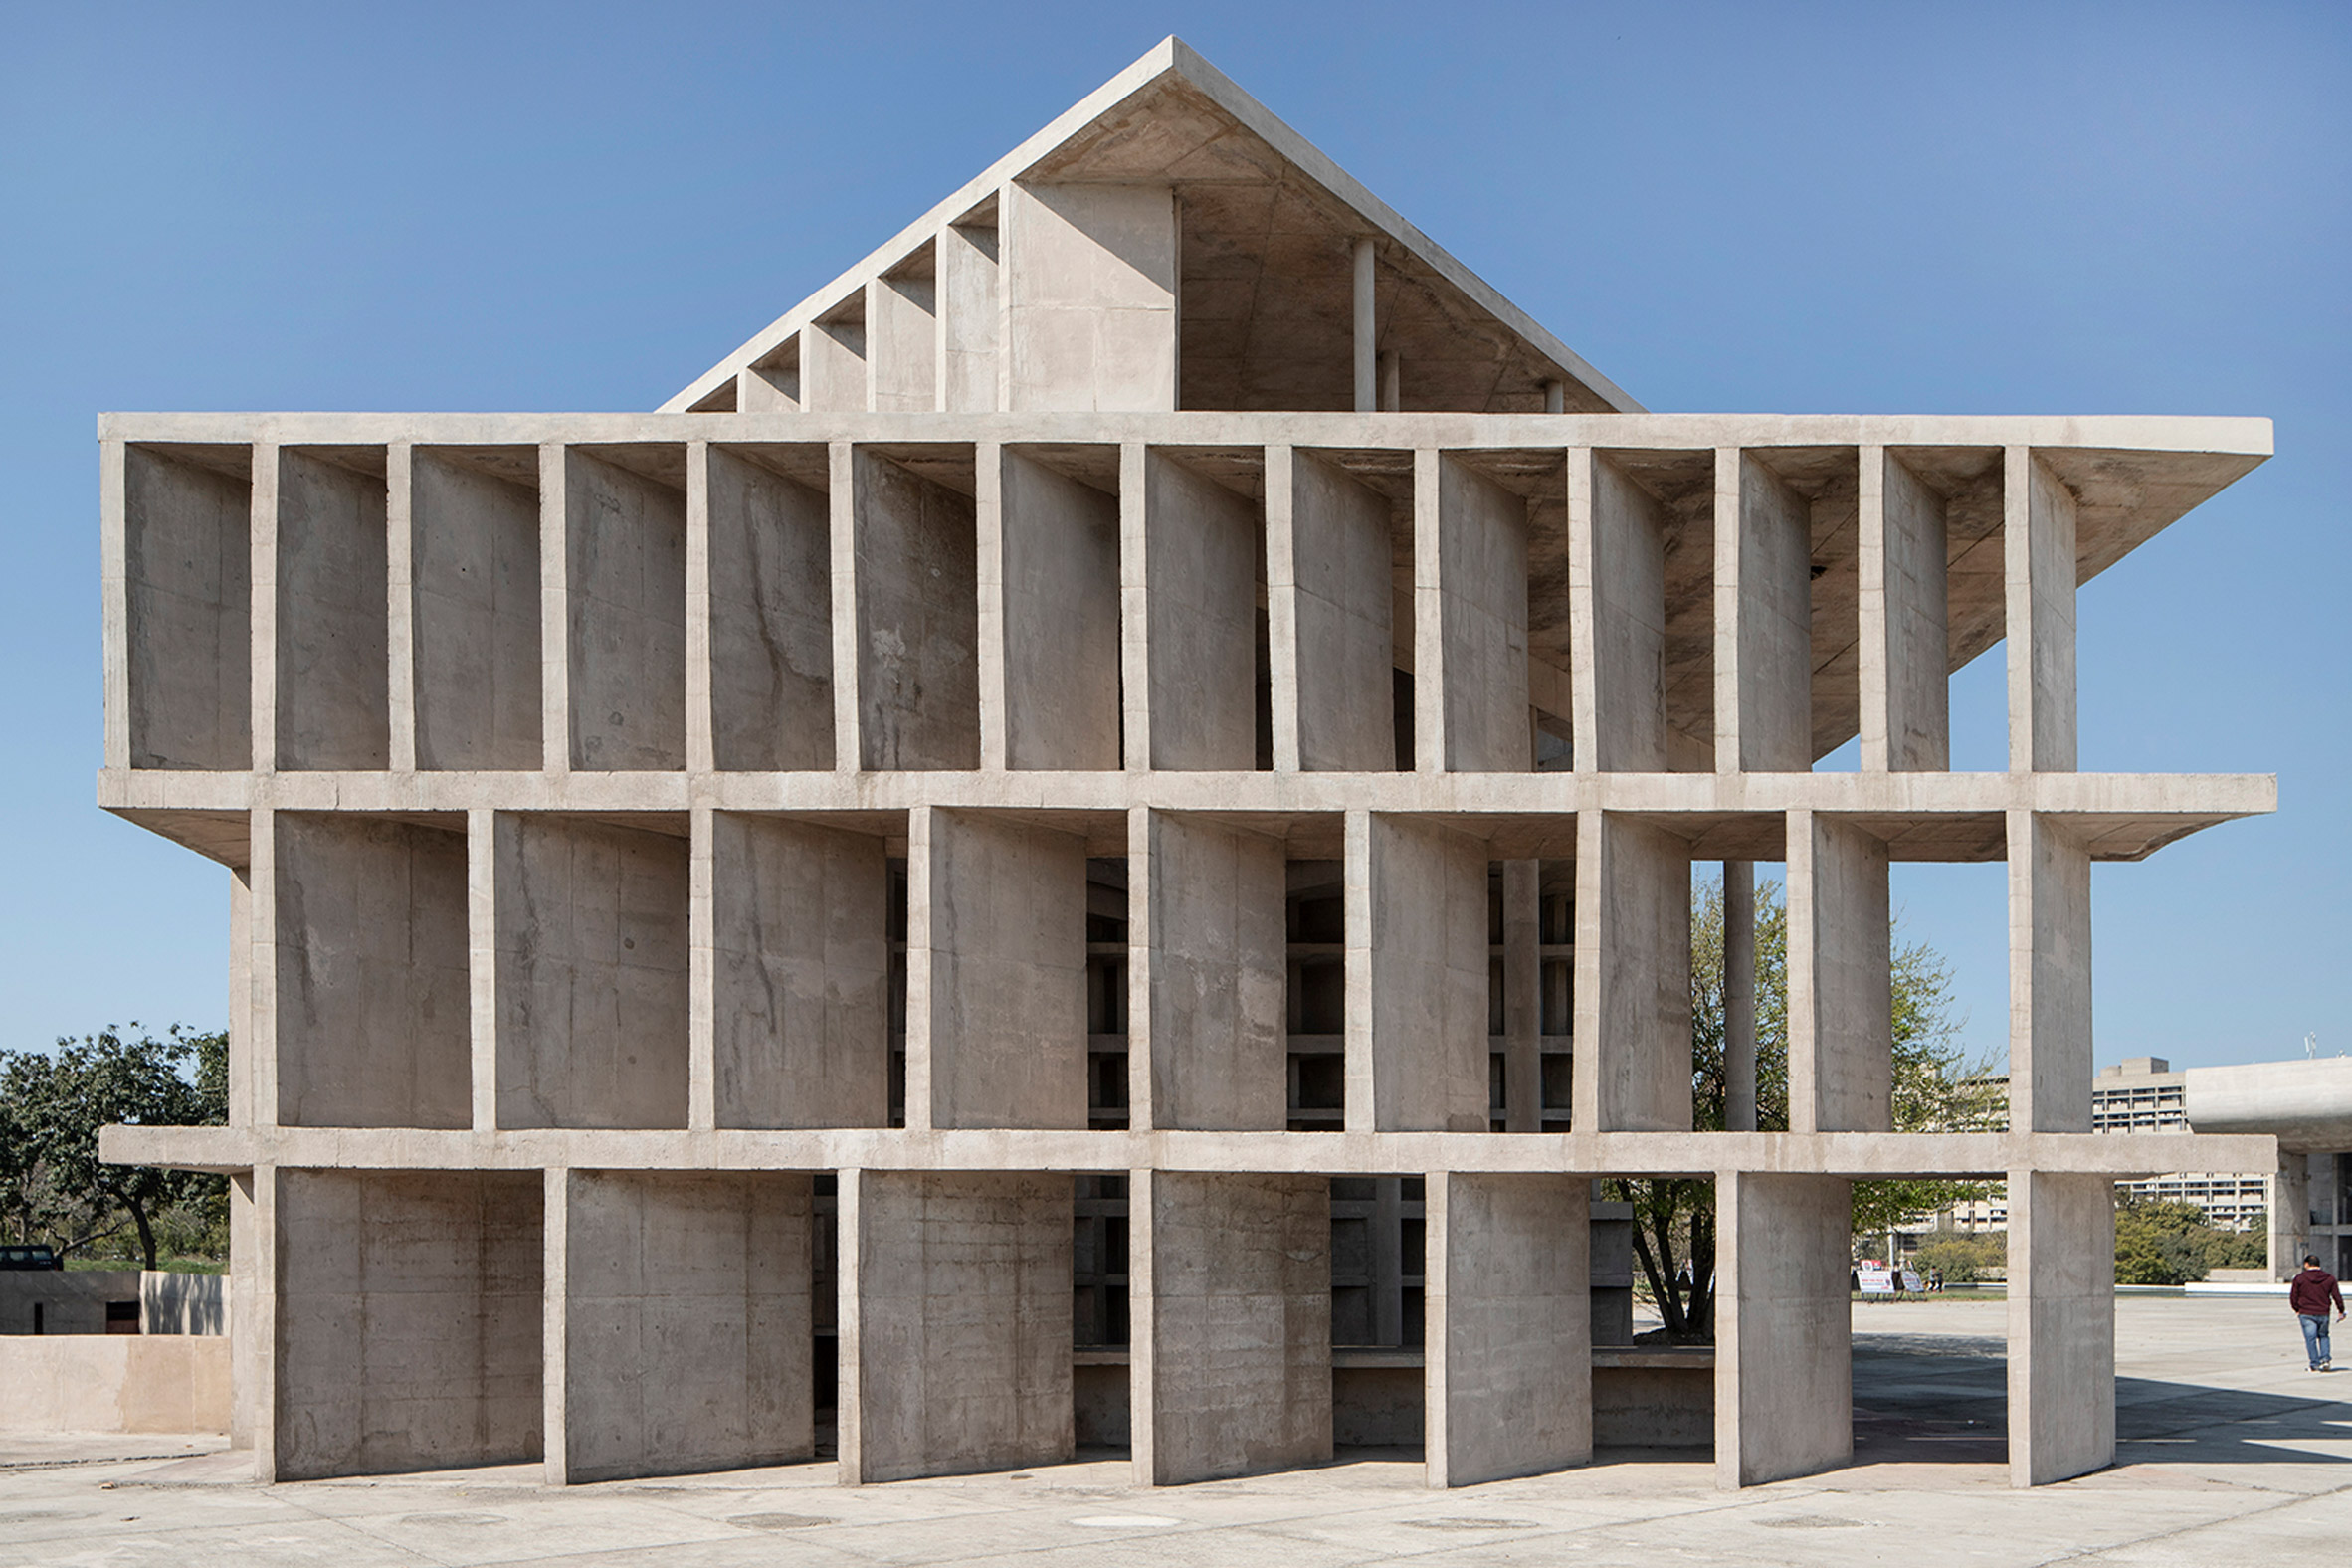 Roberto Conte captures Chandigarh's iconic modernist buildings